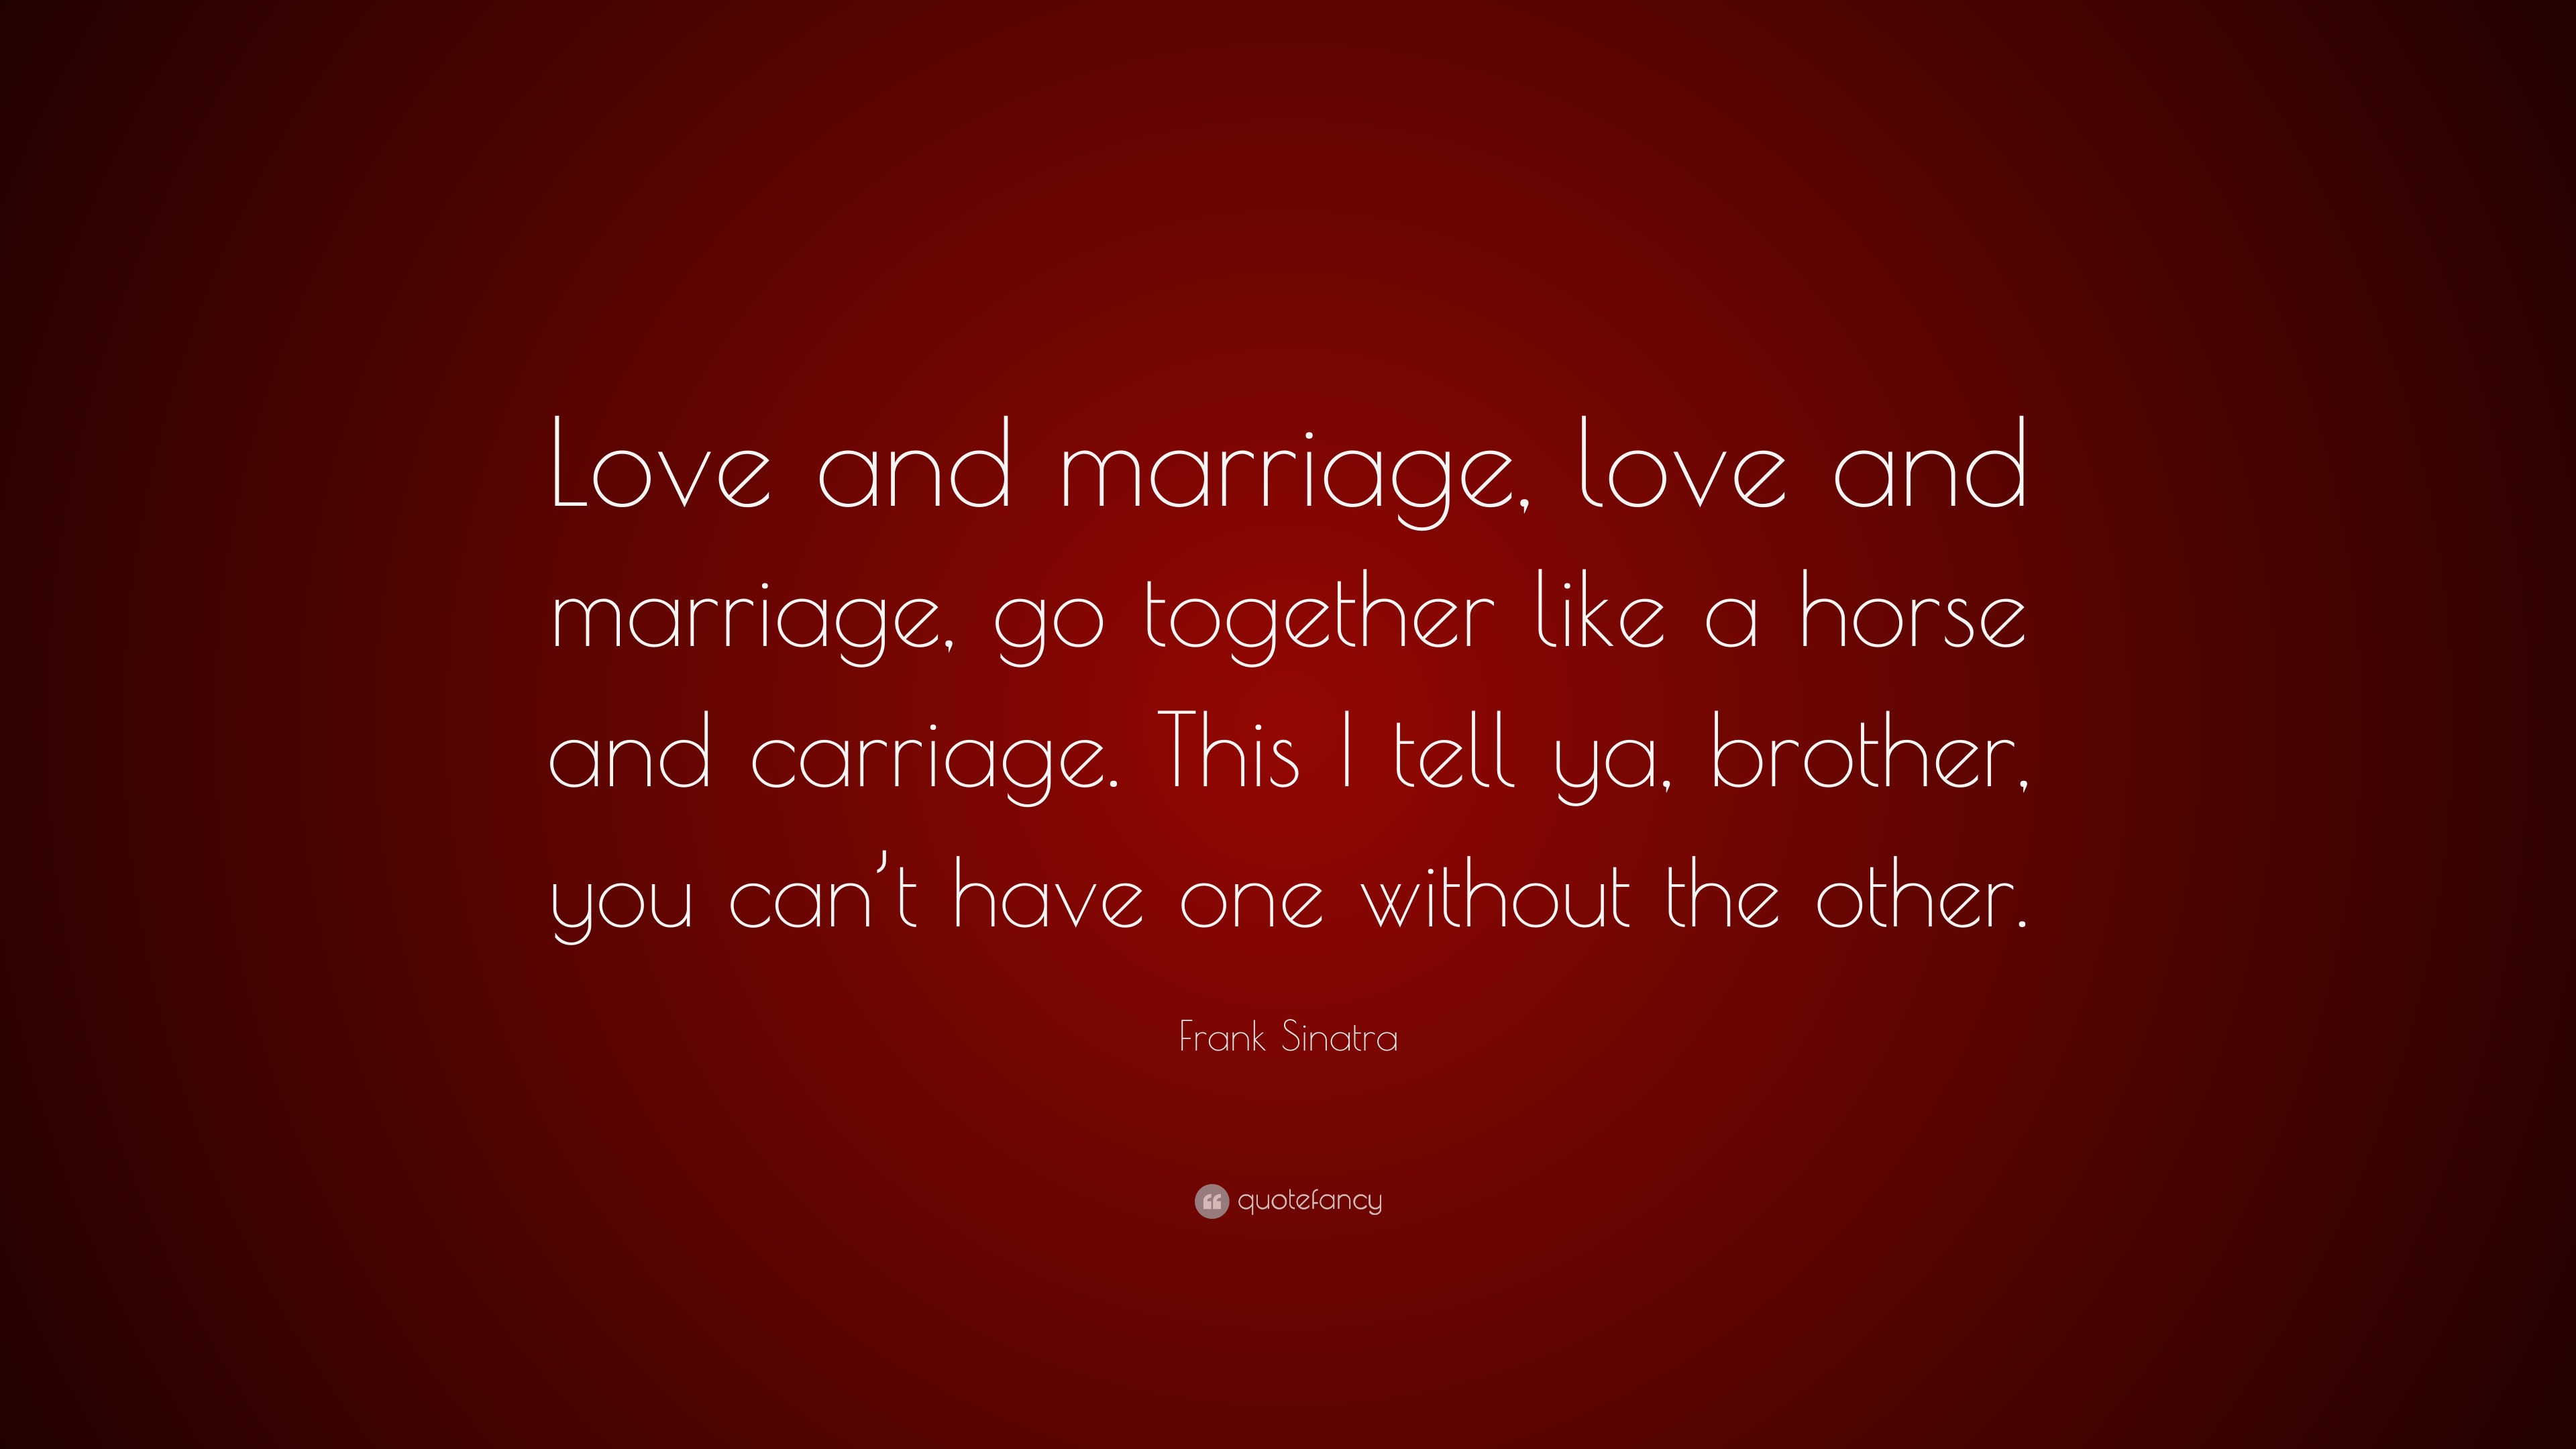 Frank Sinatra Quote: “Love and marriage, love and marriage, go together - Love And Marriage Go Together Like A Horse And Carriage